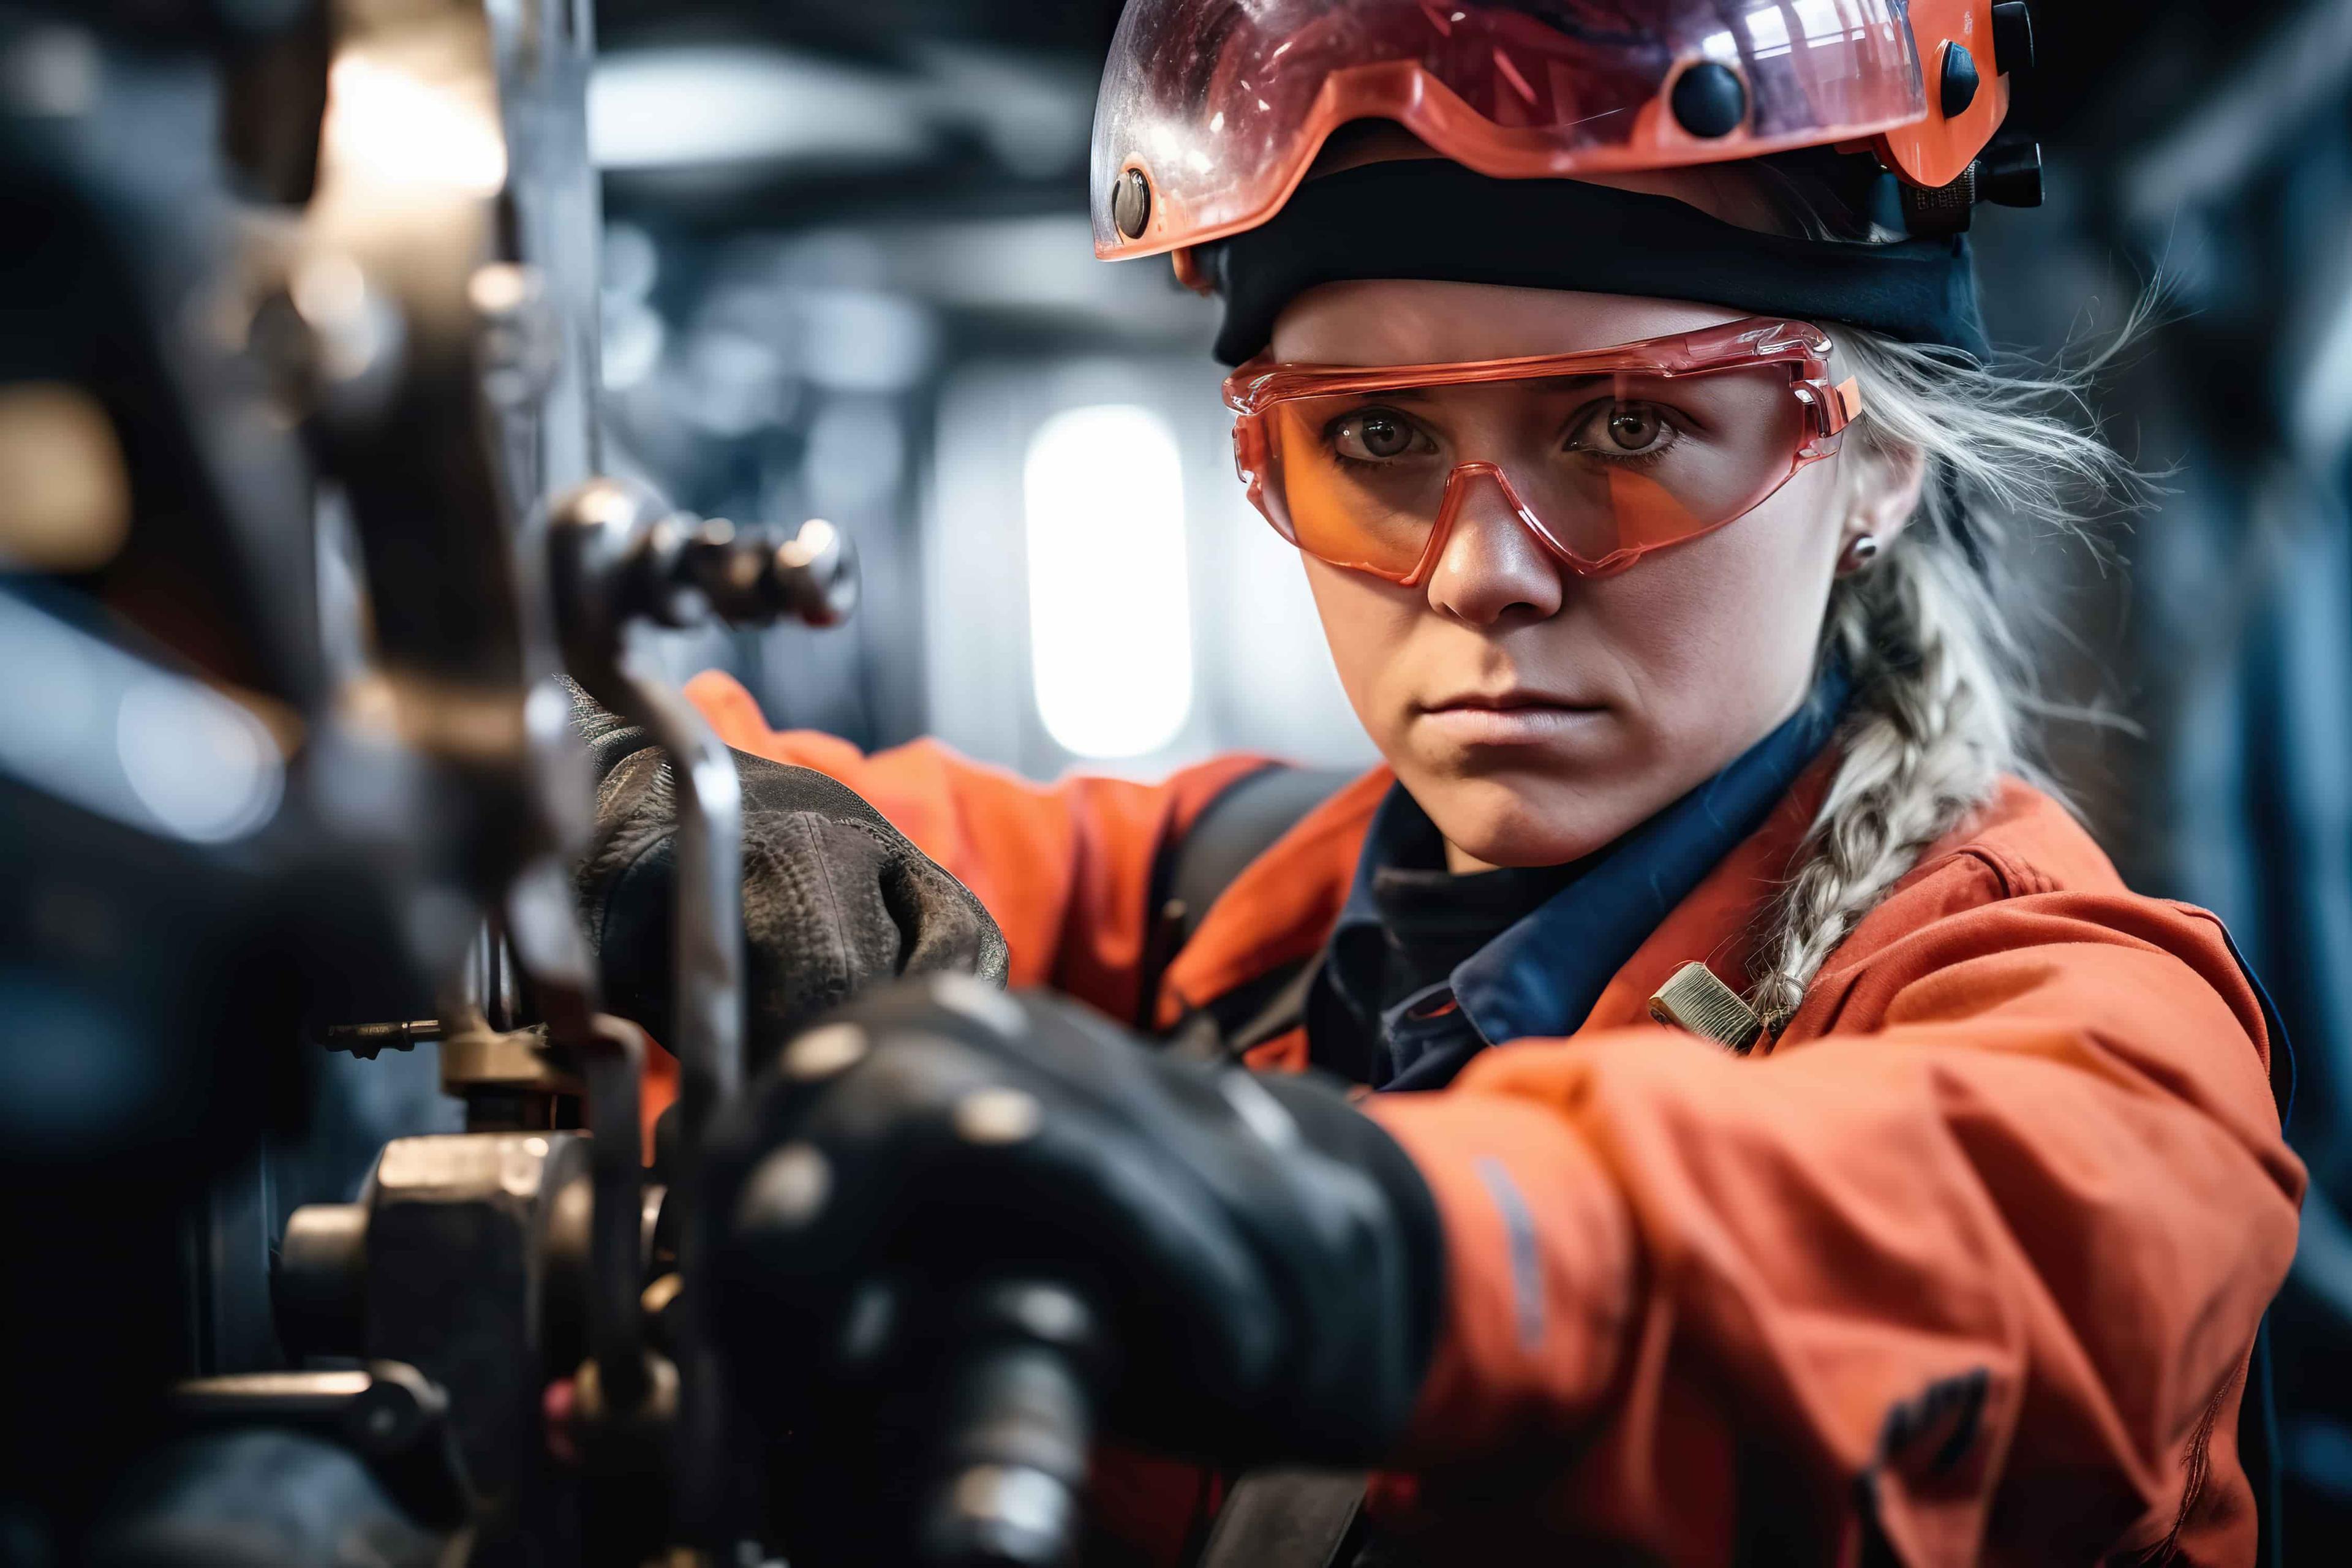 Supporting Women's Growth in Manufacturing